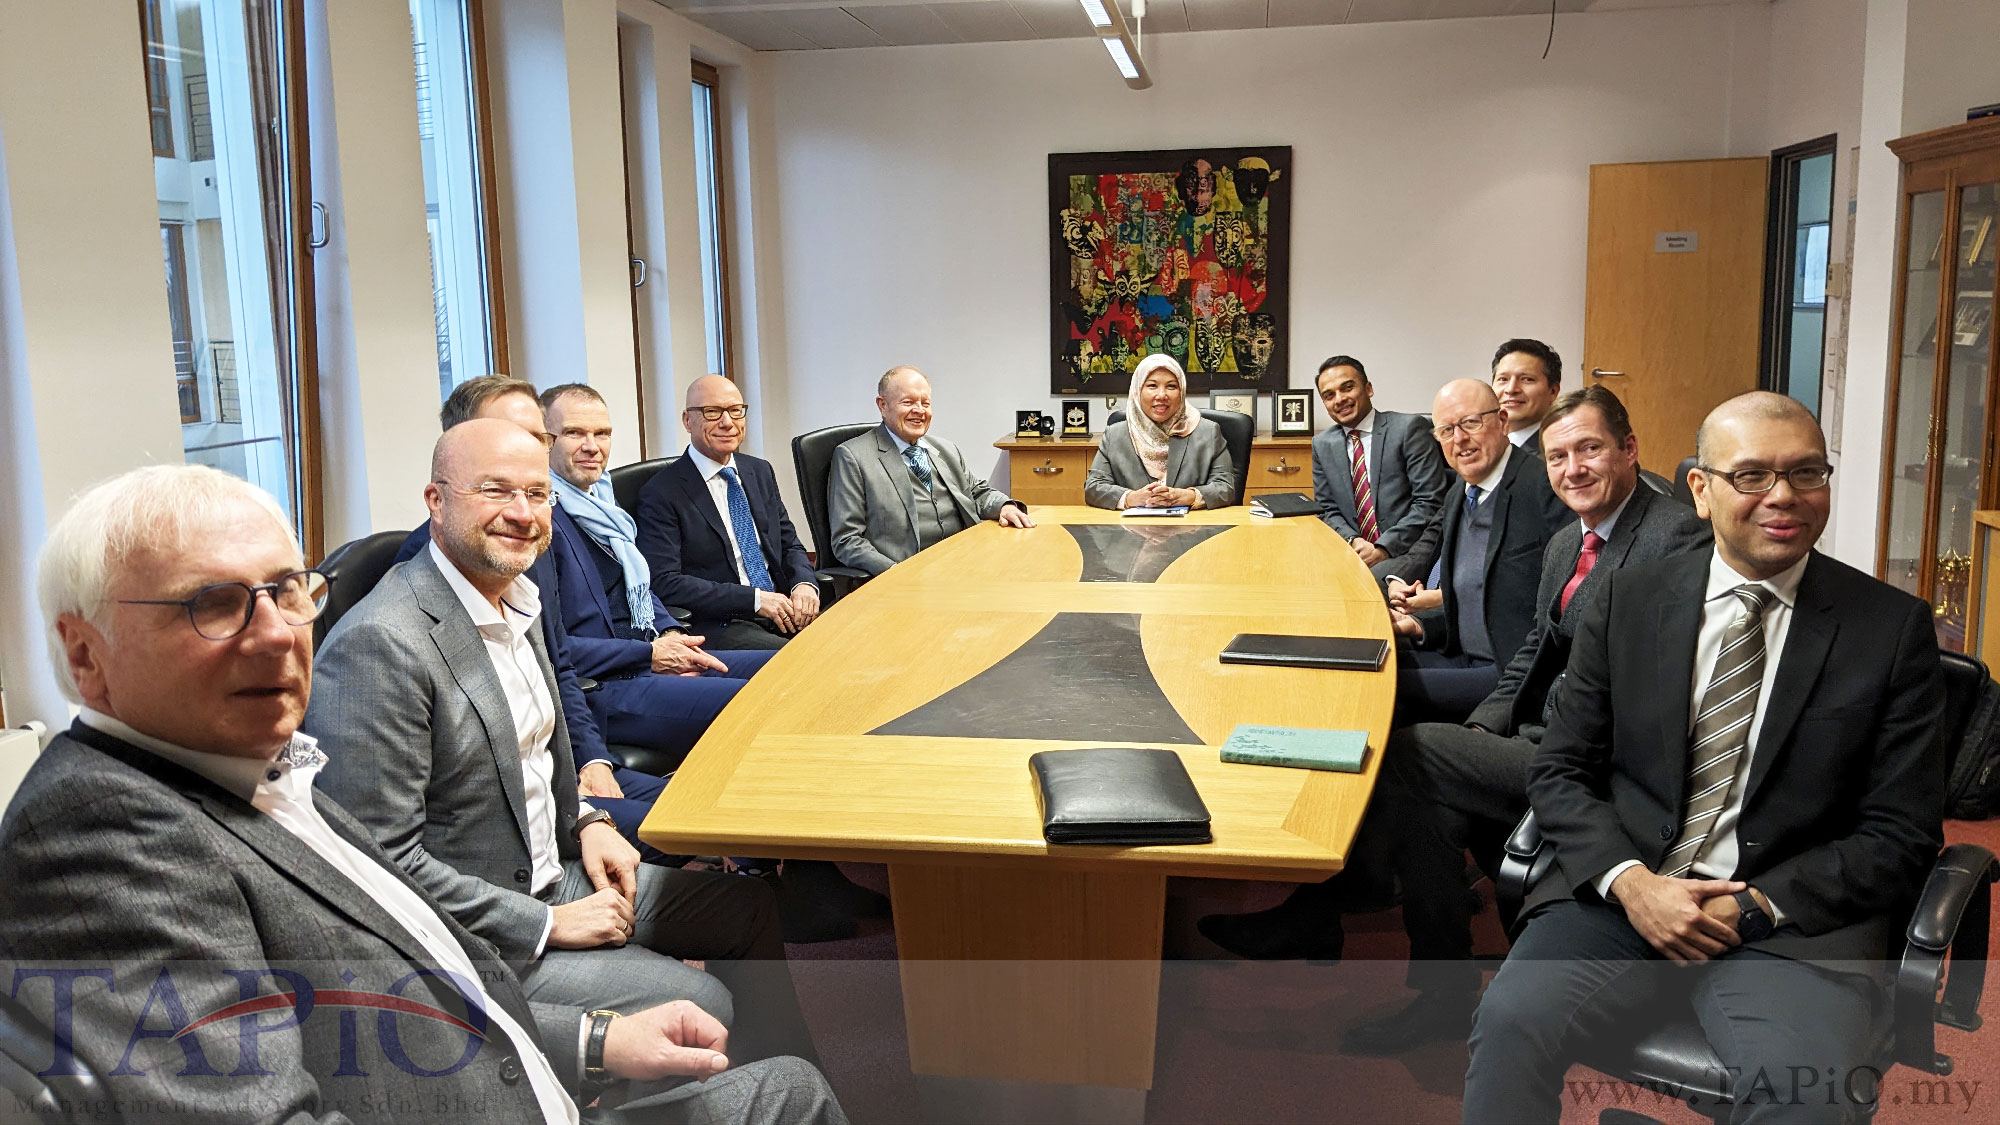 Mr. Tapio Bernhard Schütte, Chairman of TAPiO, had the honor of visiting Her Excellency Dr. Adina Kamarudin, the Malaysian Ambassador to Germany in Berlin with his delegation.